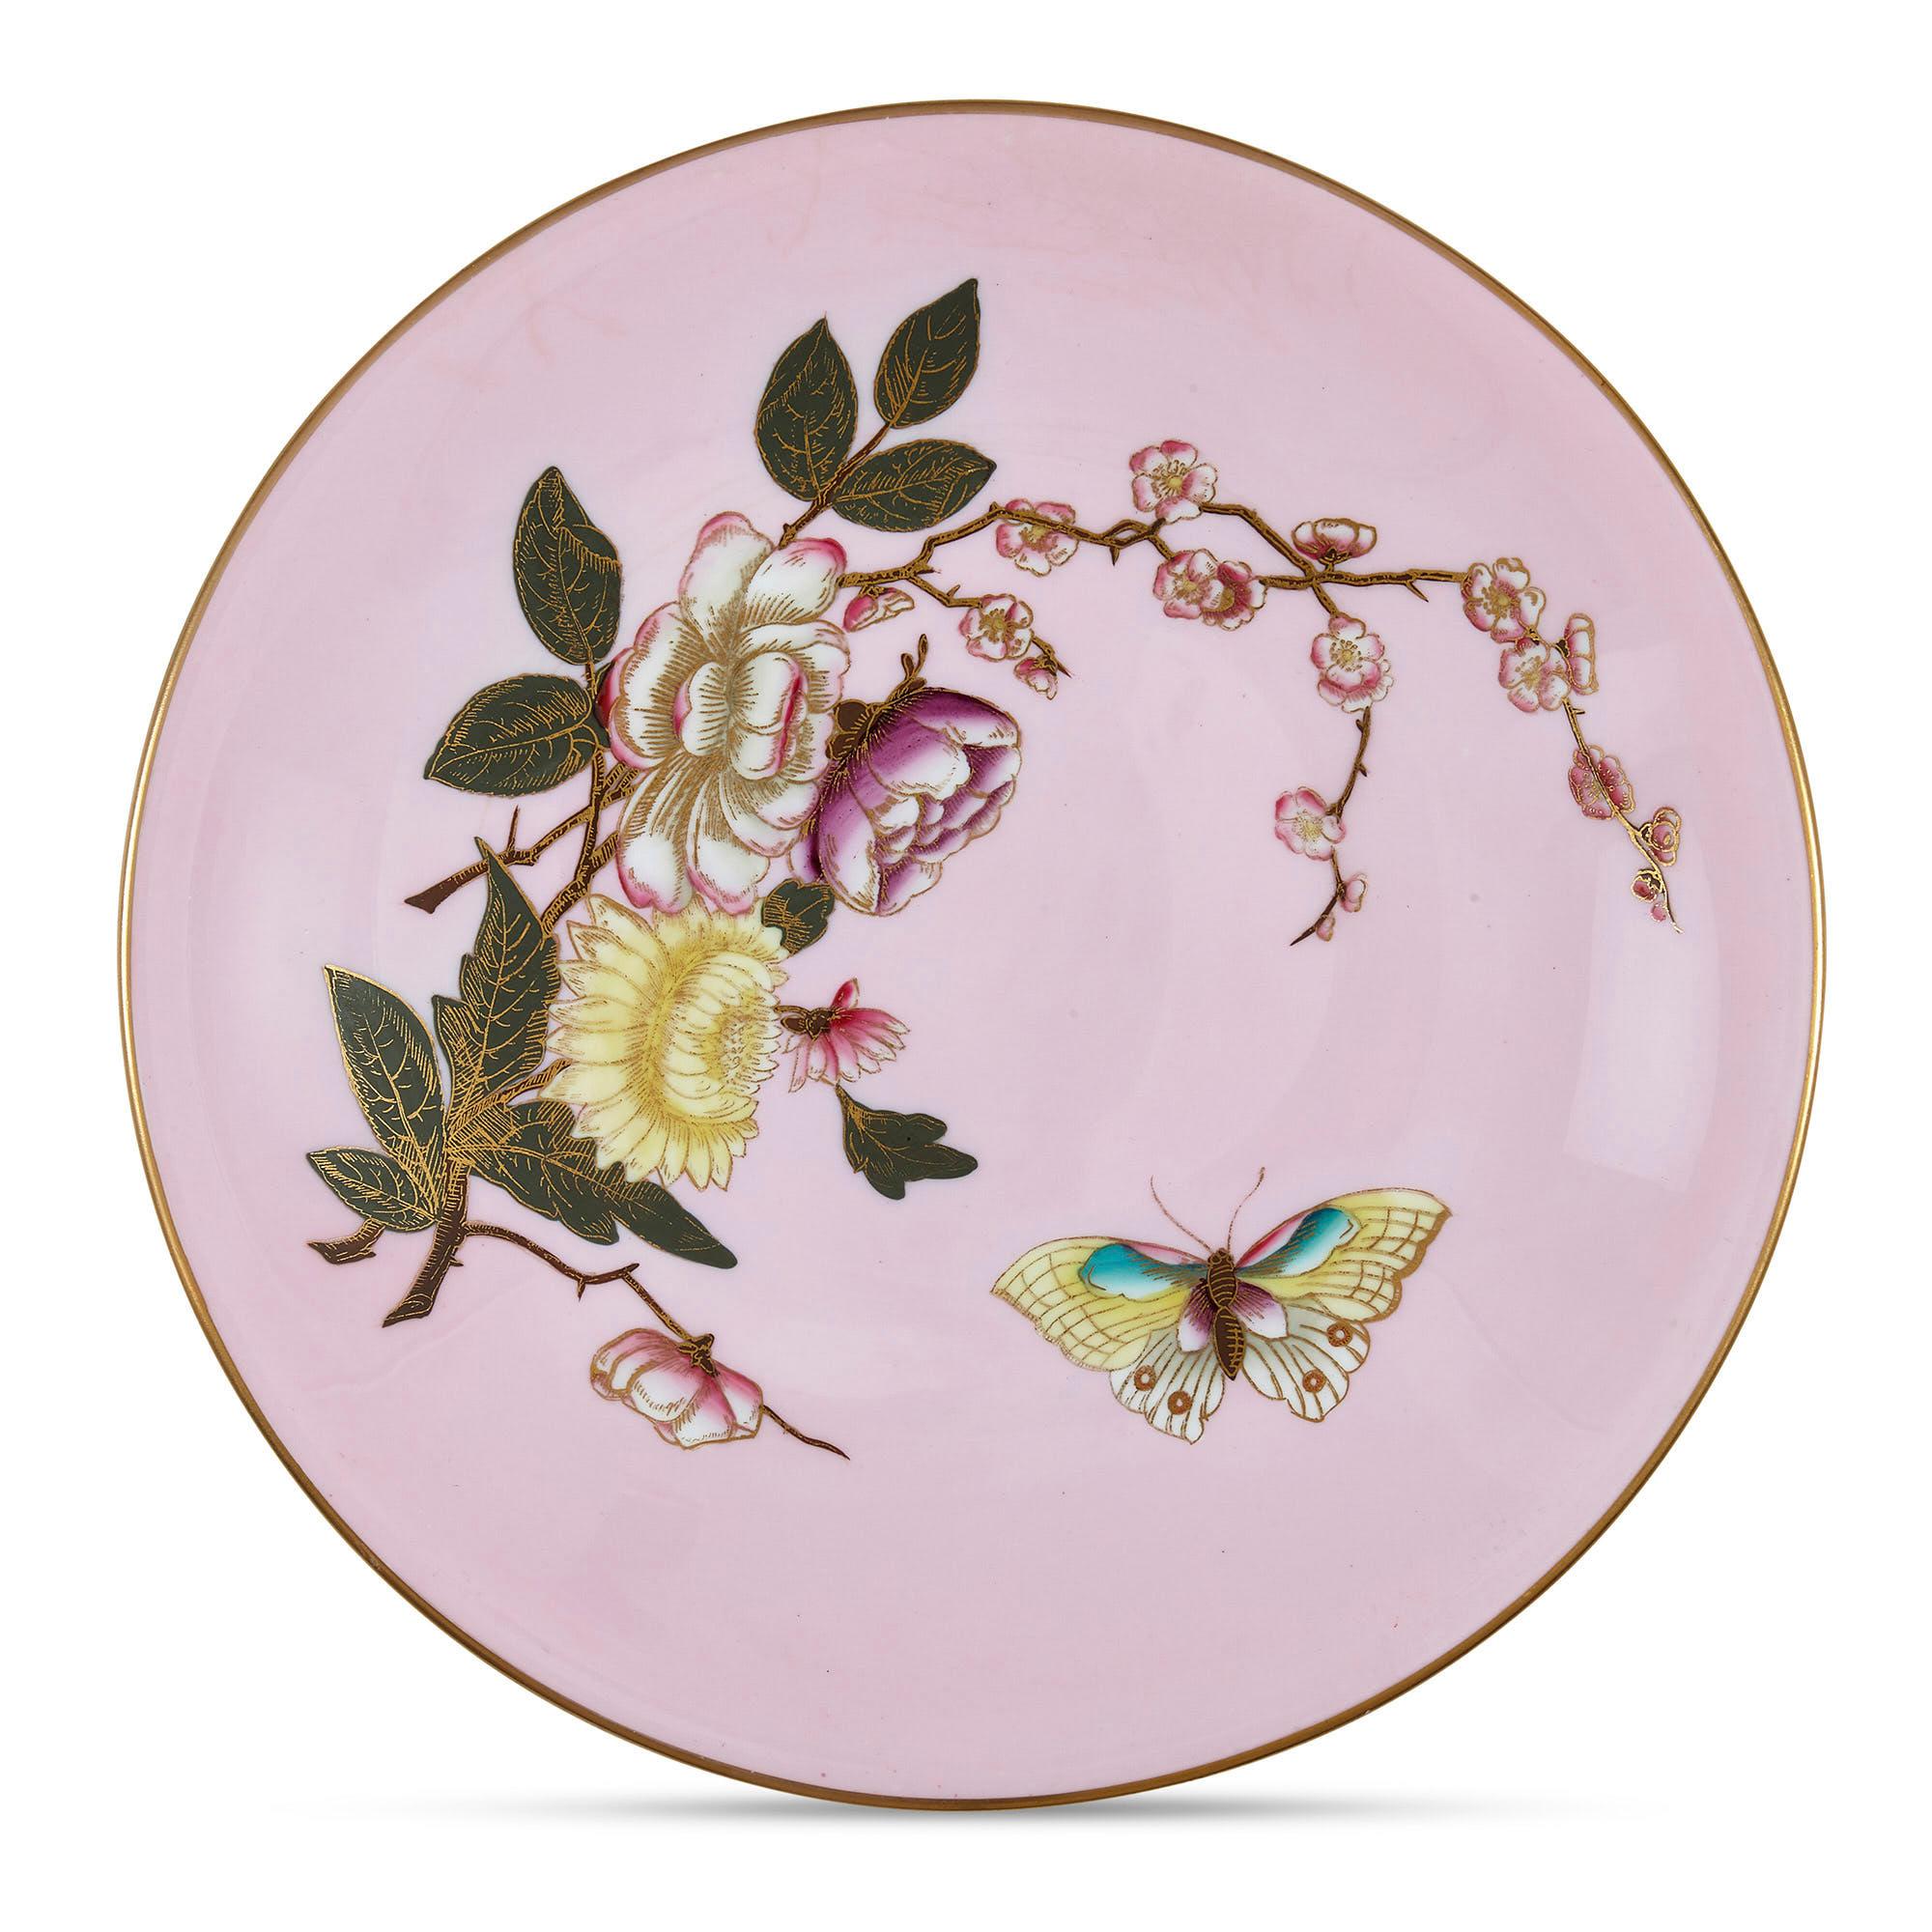 Set of five pink Royal Worcester plates with Japonisme decoration
English, early 20th century
Measures: Height 3cm, diameter 23cm

This superb set of Worcester porcelain plates features the highly unusual juxtaposition of a vibrant pink ground